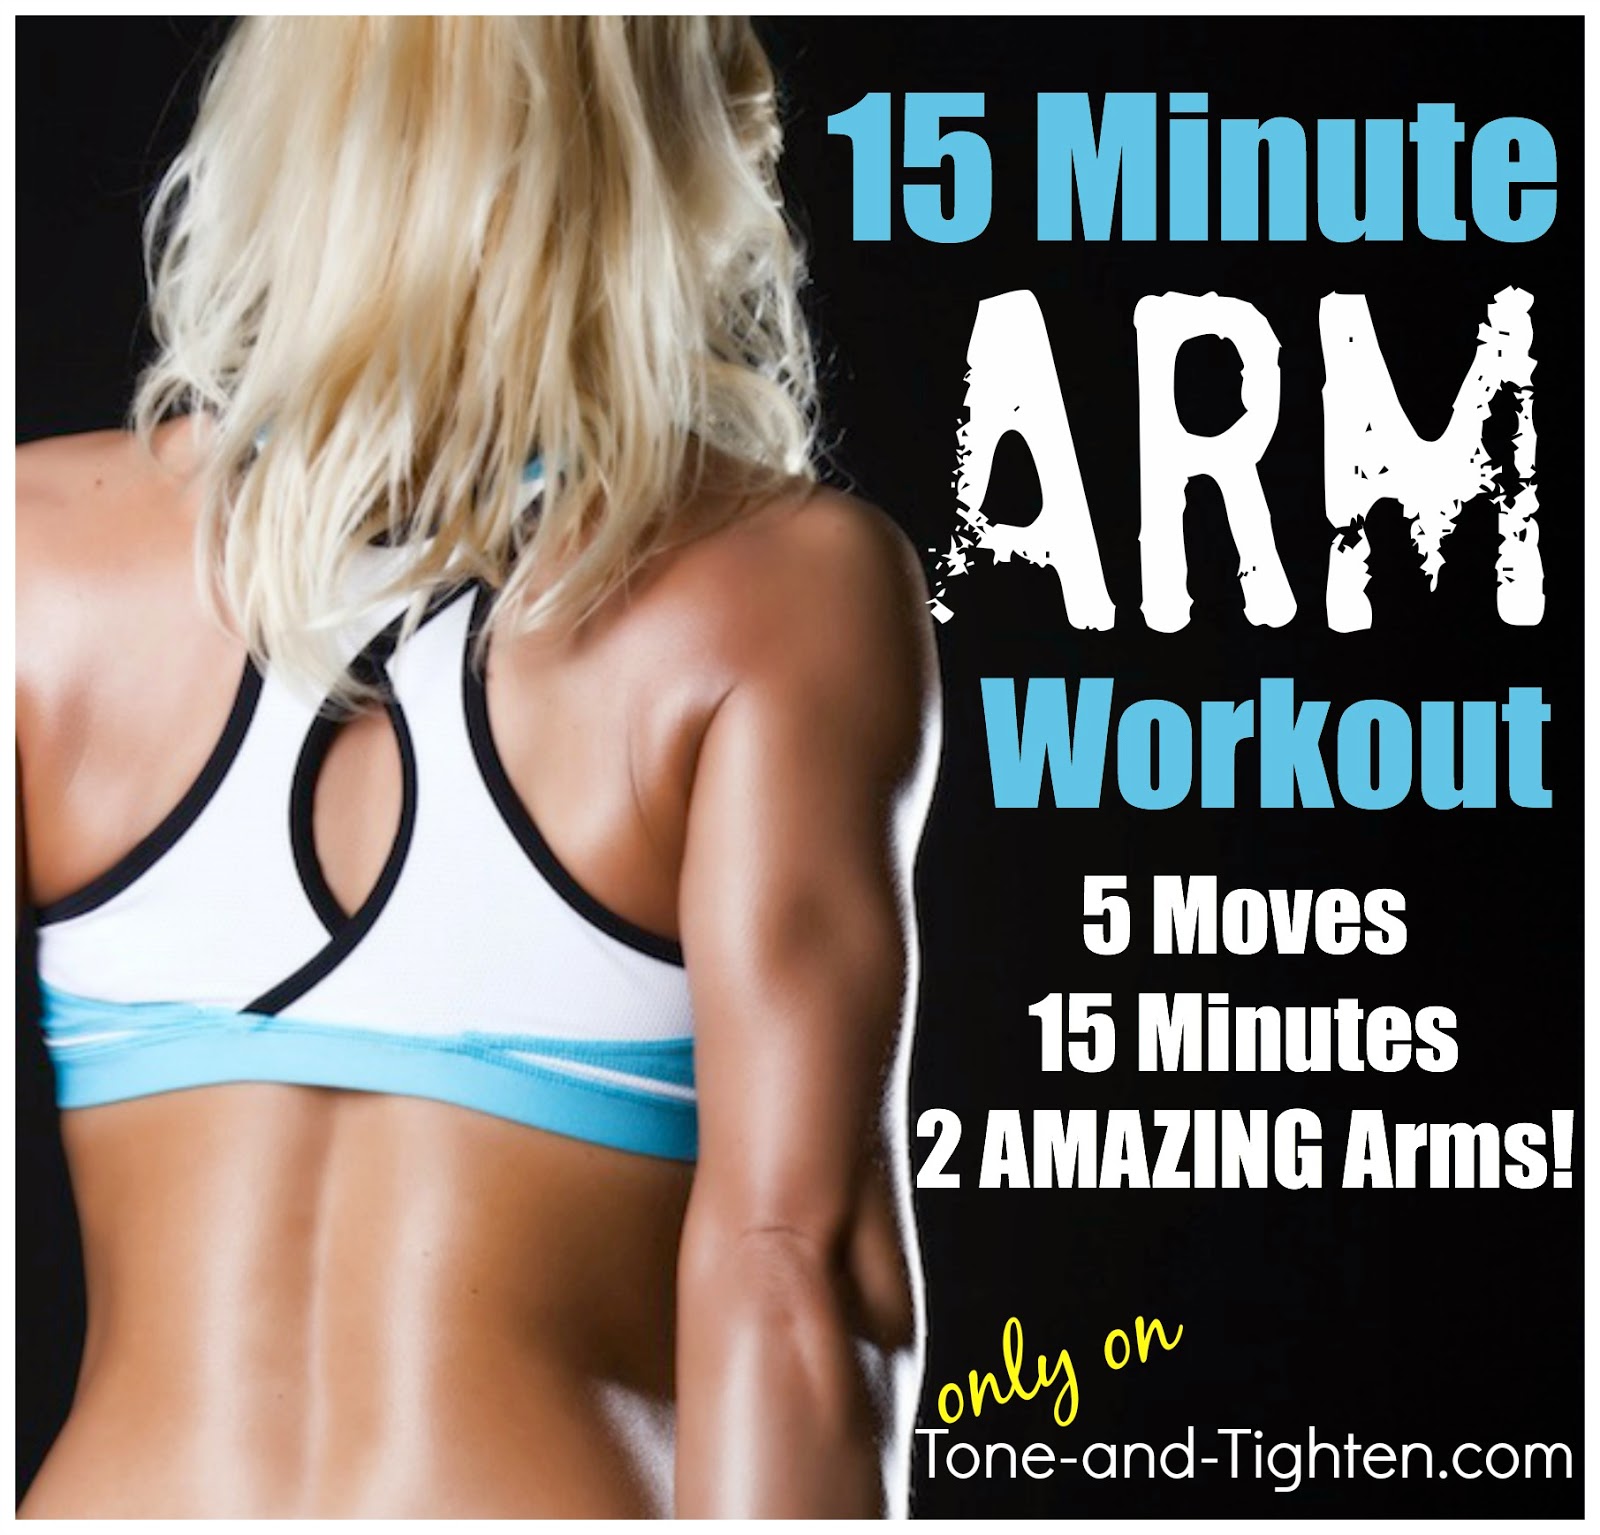 https://tone-and-tighten.com/2014/02/15-minute-at-home-arm-workout-sleek-and-sexy-arms-in-no-time.html